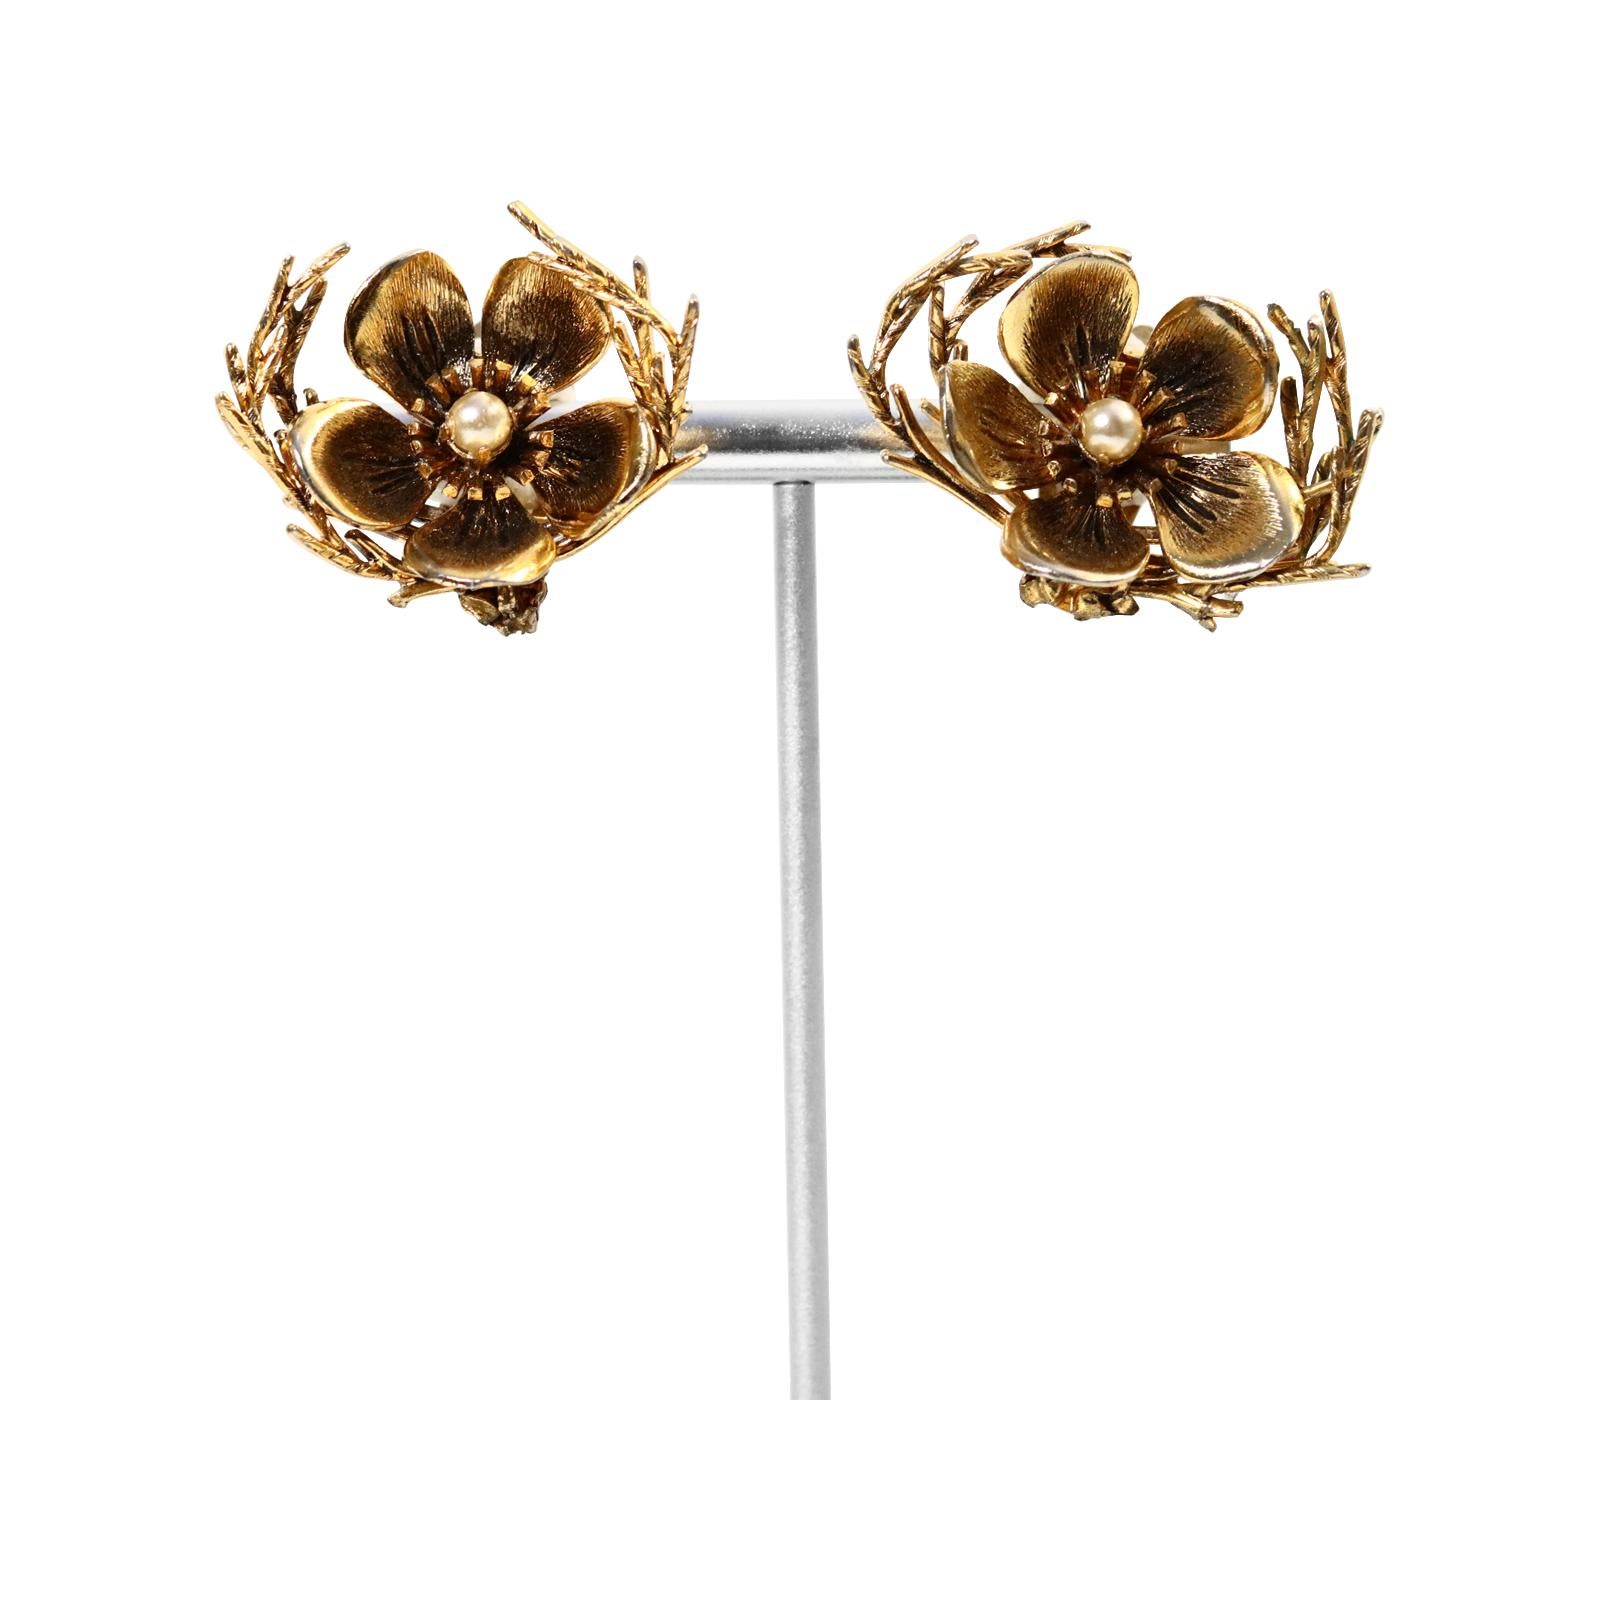 Vintage Christian Dior Boutique Gold Flower with Faux Pearl, circa 1964 For Sale 2